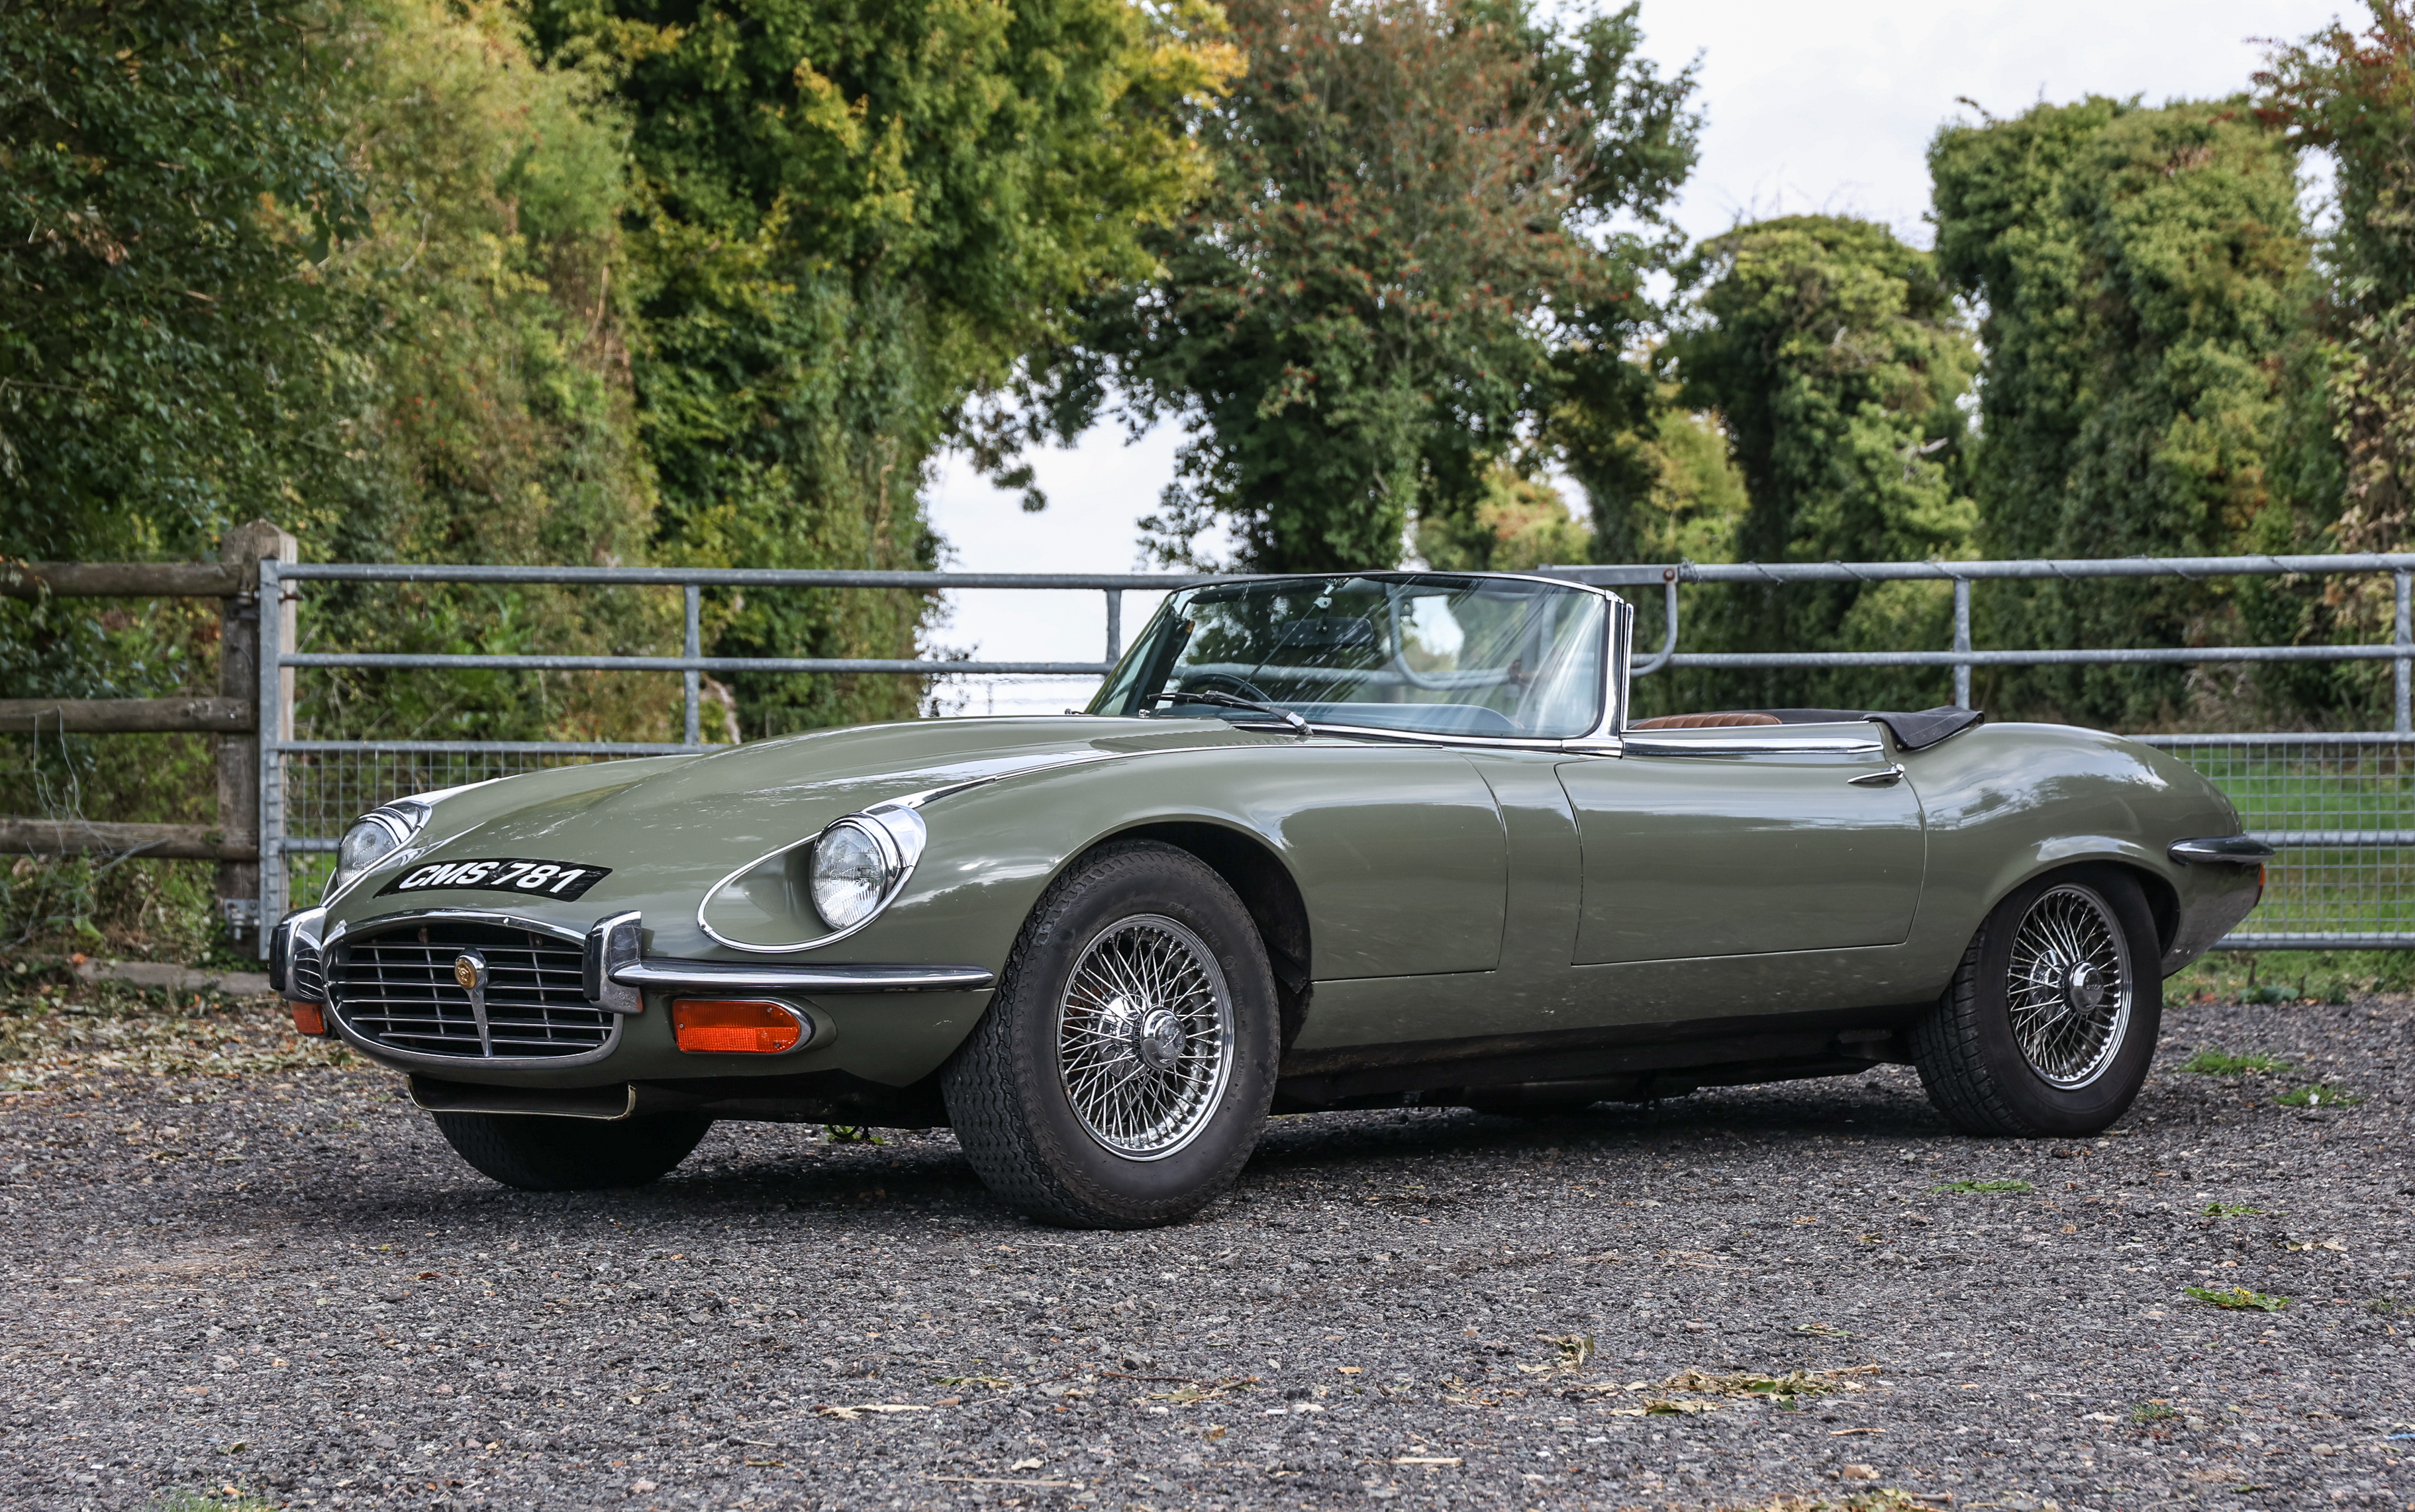 1973 JAGUAR E-TYPE SERIES III ROADSTER Registration Number: CMS 781 Chassis Number: 1S1868 - Image 10 of 22